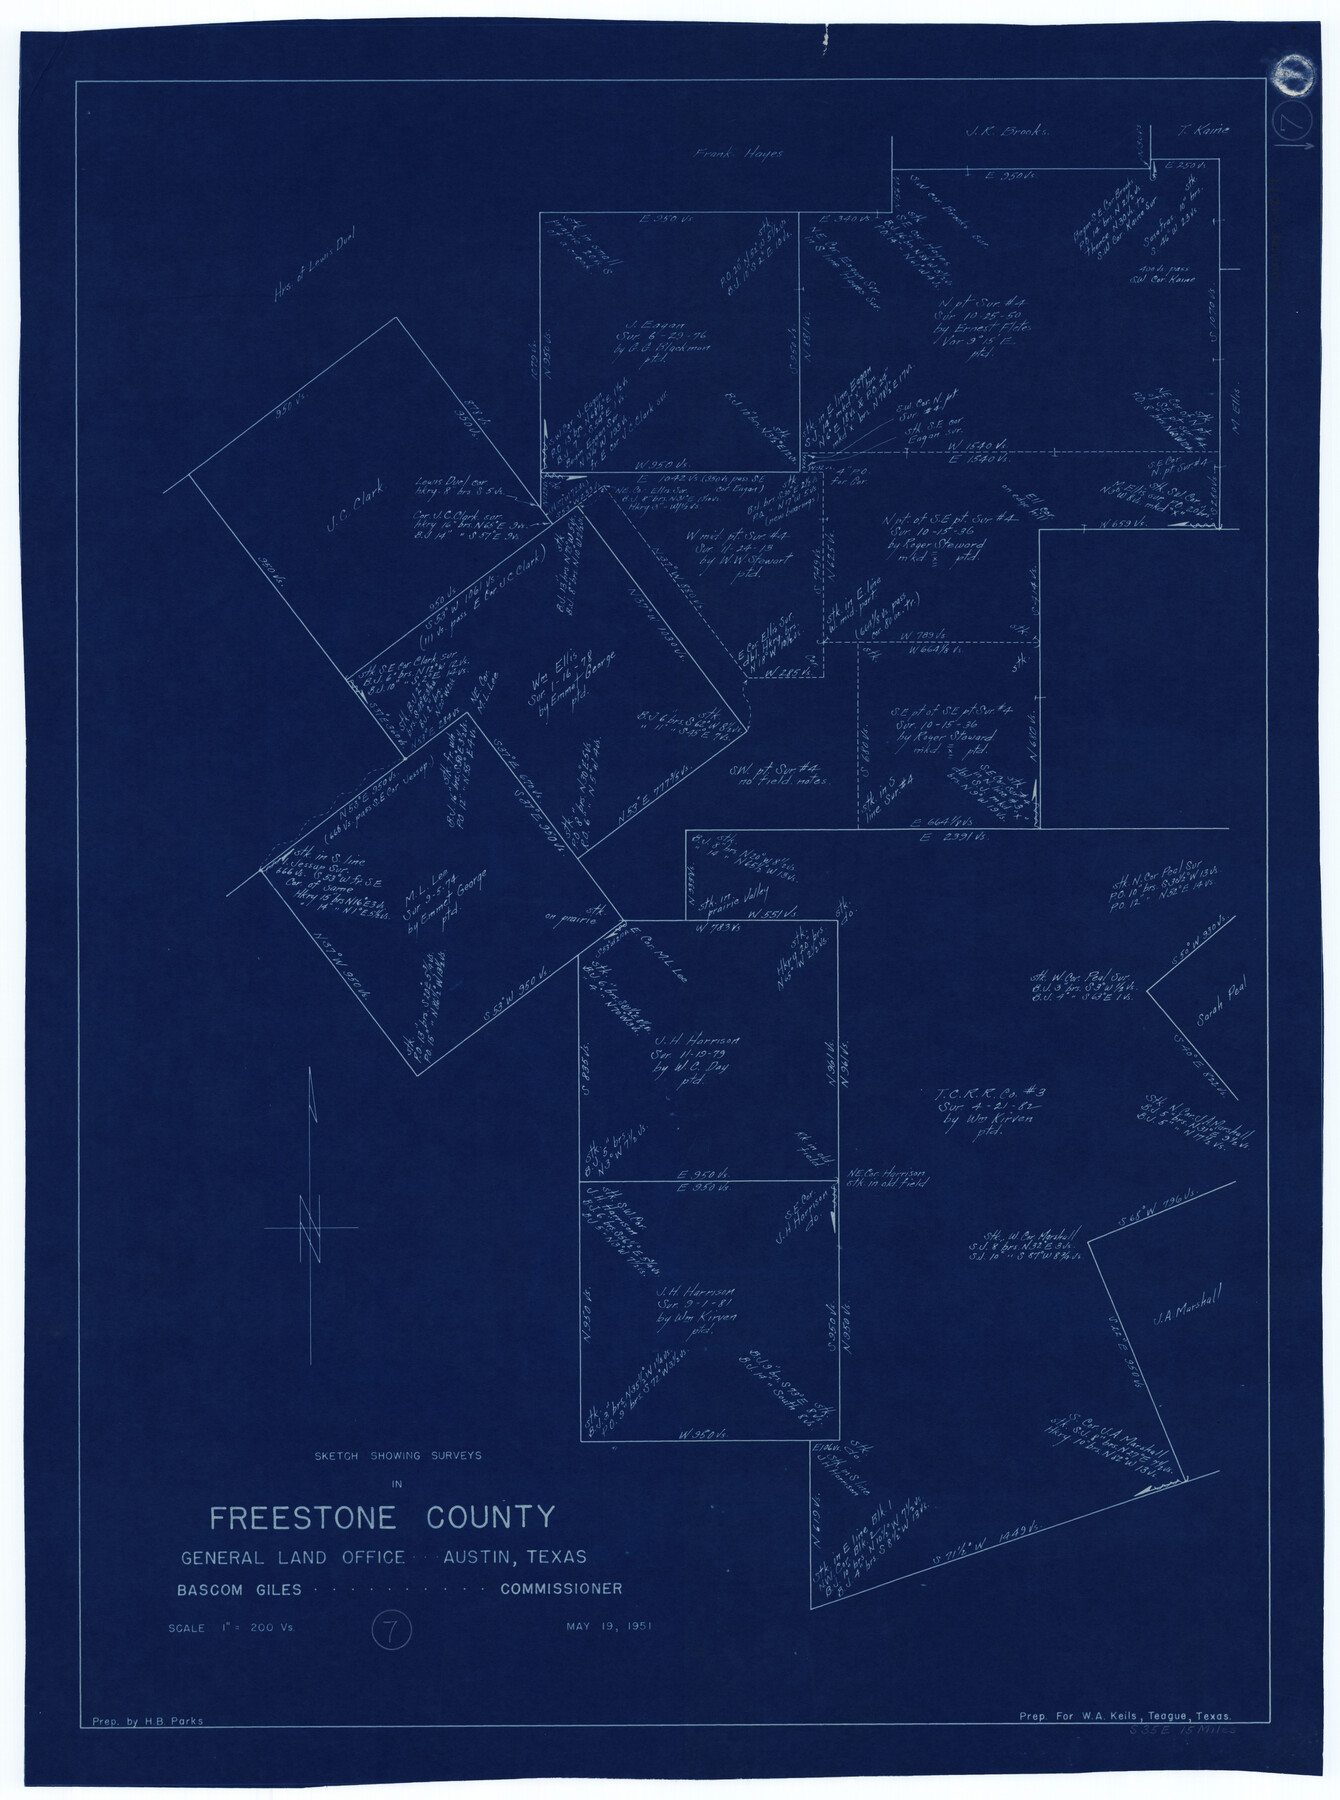 69249, Freestone County Working Sketch 7, General Map Collection